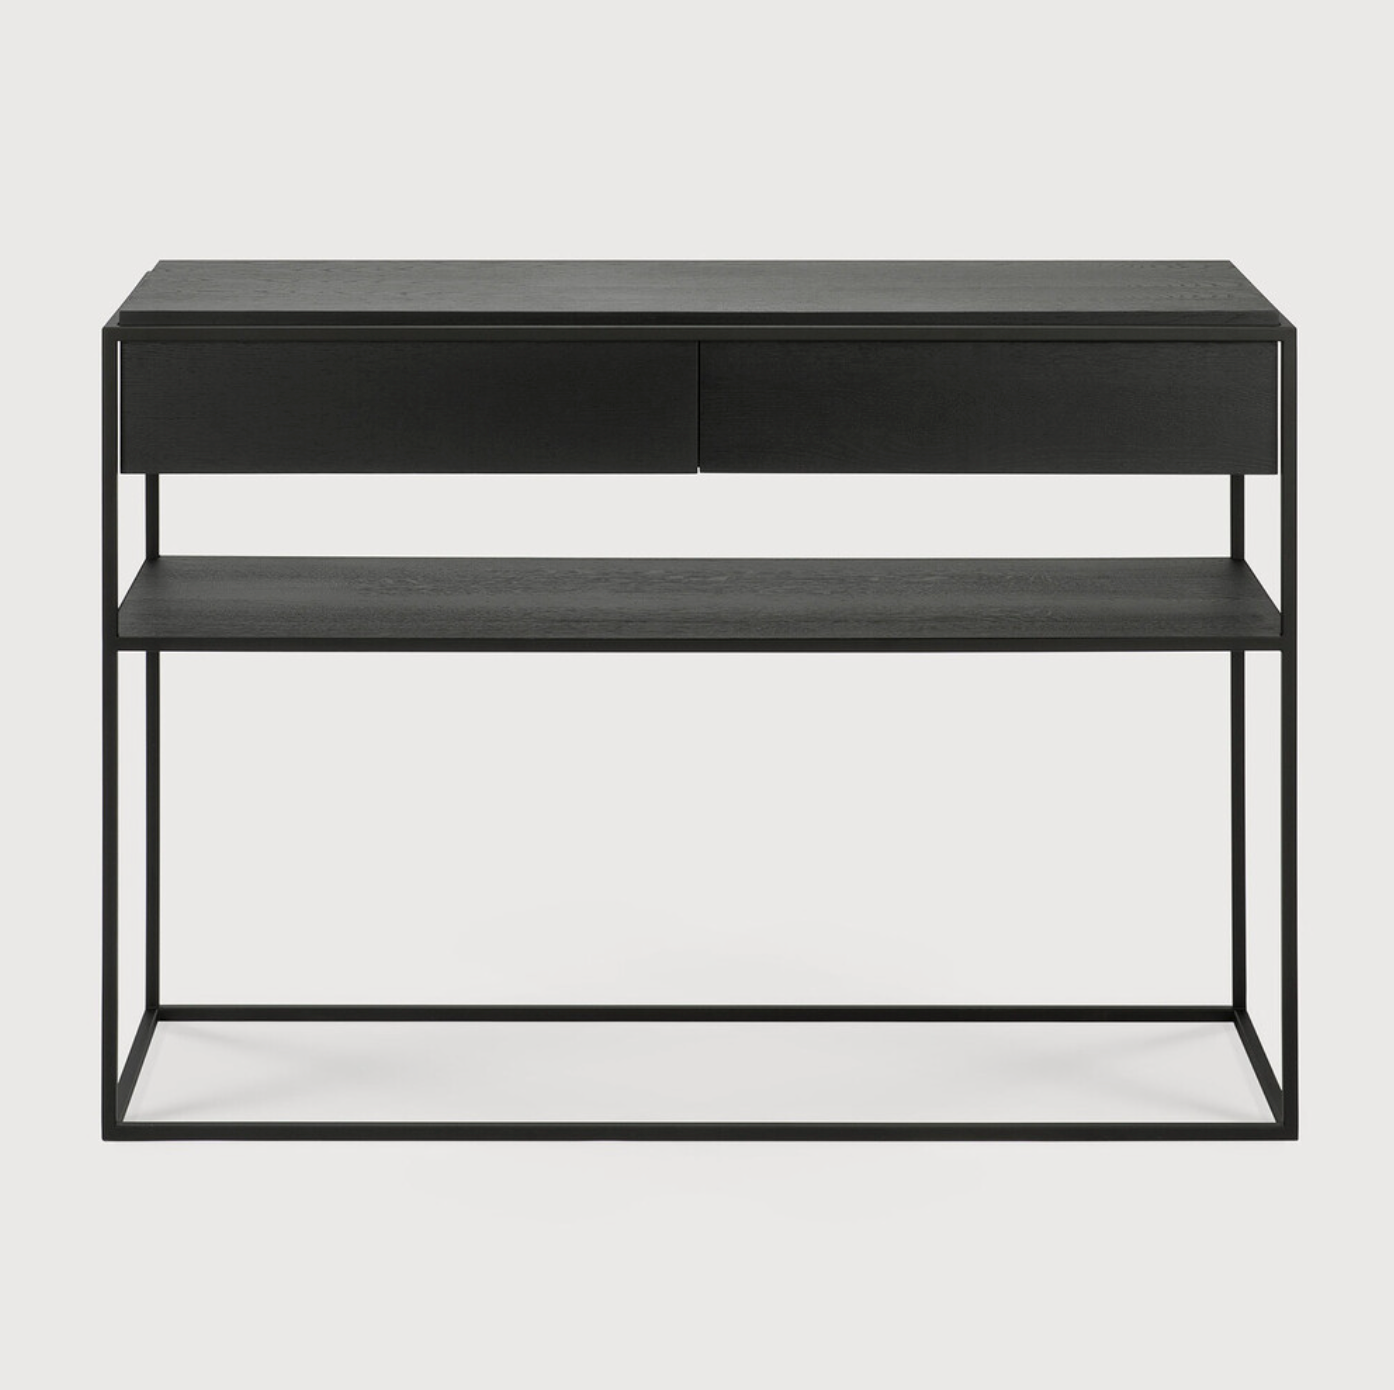 Balance and function come together in the Monolit console table. This simple, sleek table includes storage and we LOVE hidden storage! Dress up your living room or office with a piece that is both functional and stylish!  Dimensions: 48.5"w x 16"d x 33.5"h  Weight: 77 lbs  Material: Oak, 100% solid wood Finish: Varnished